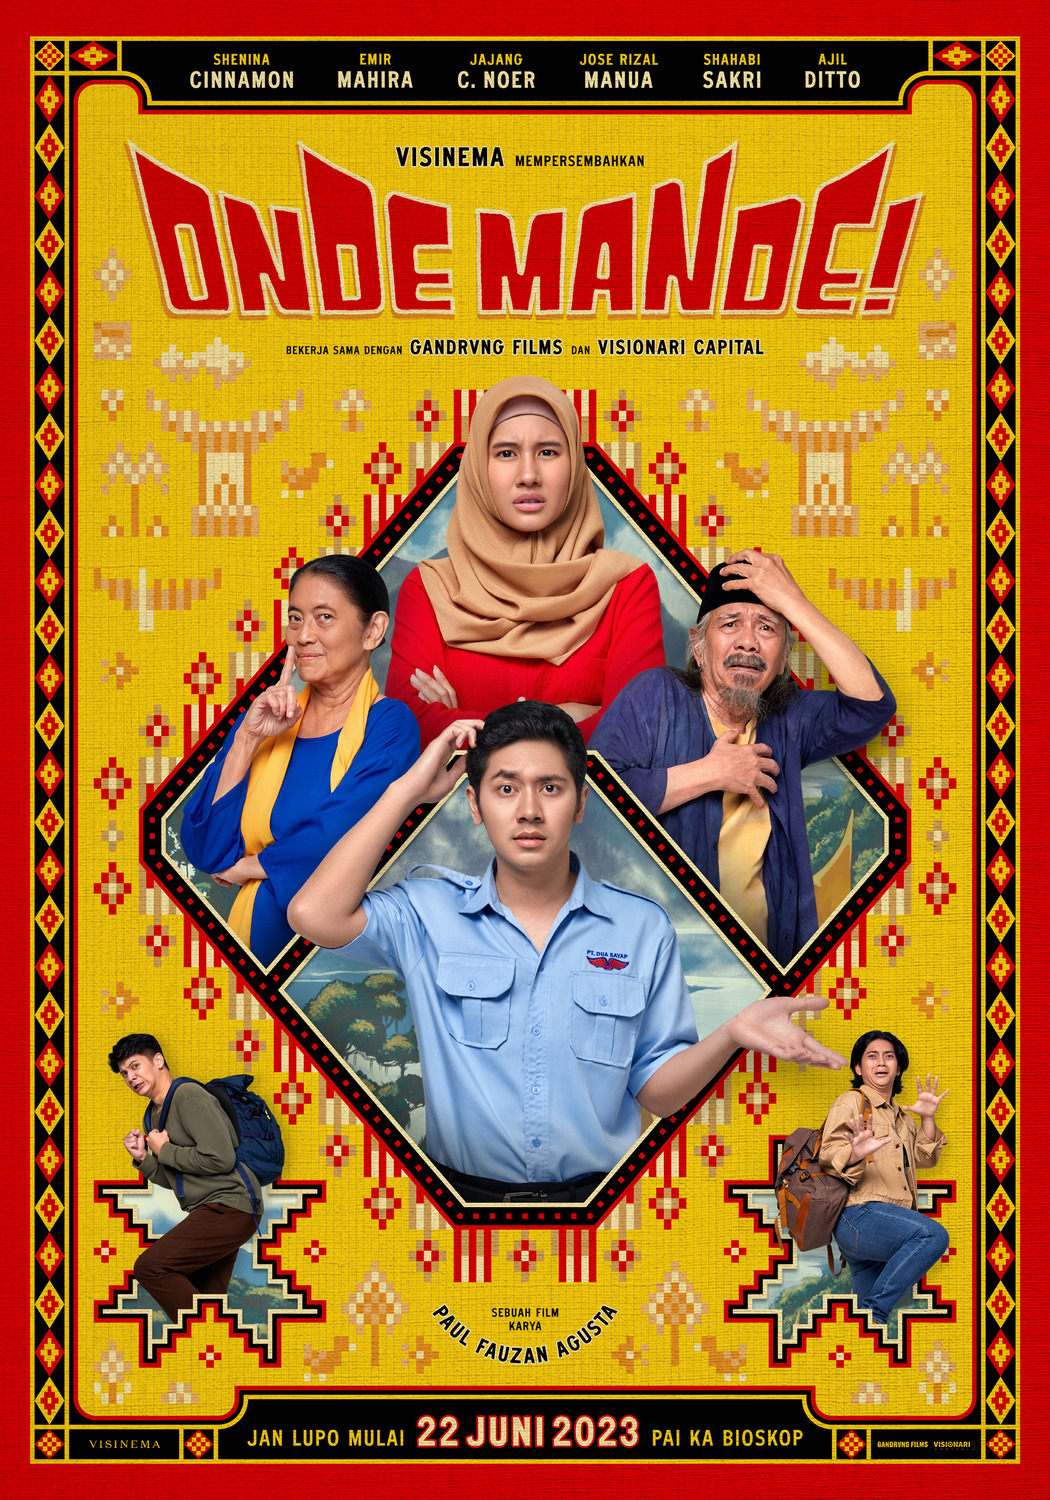 Extra Large Movie Poster Image for Onde Mande! (#2 of 8)